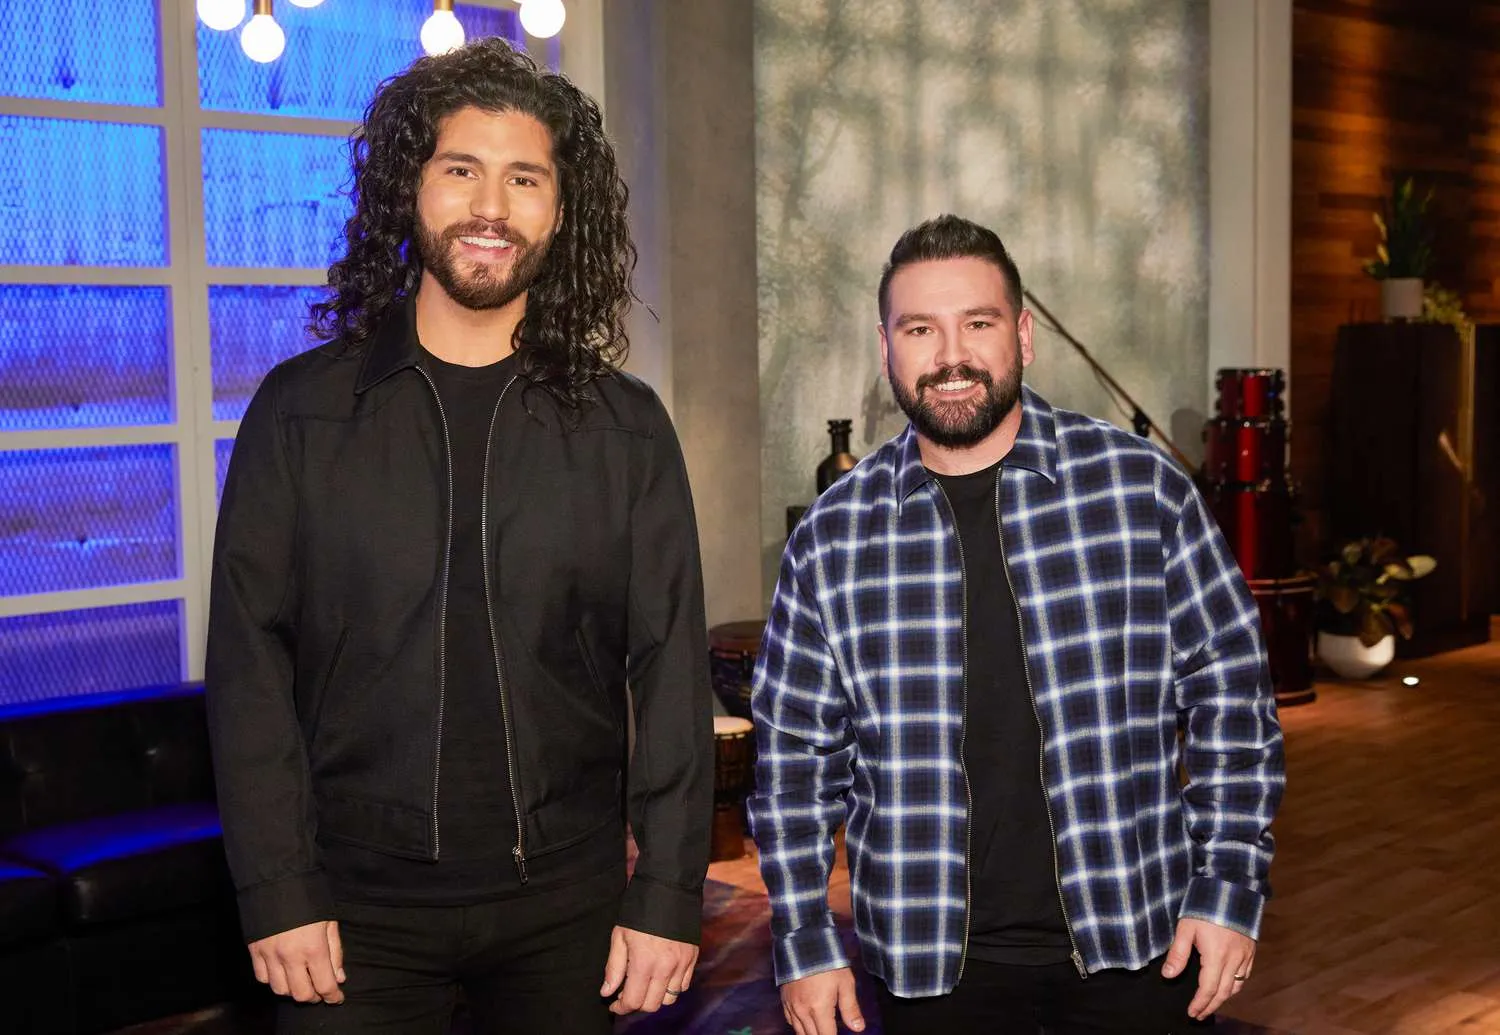 Who are Dan and Shay Replacing on the Voice?